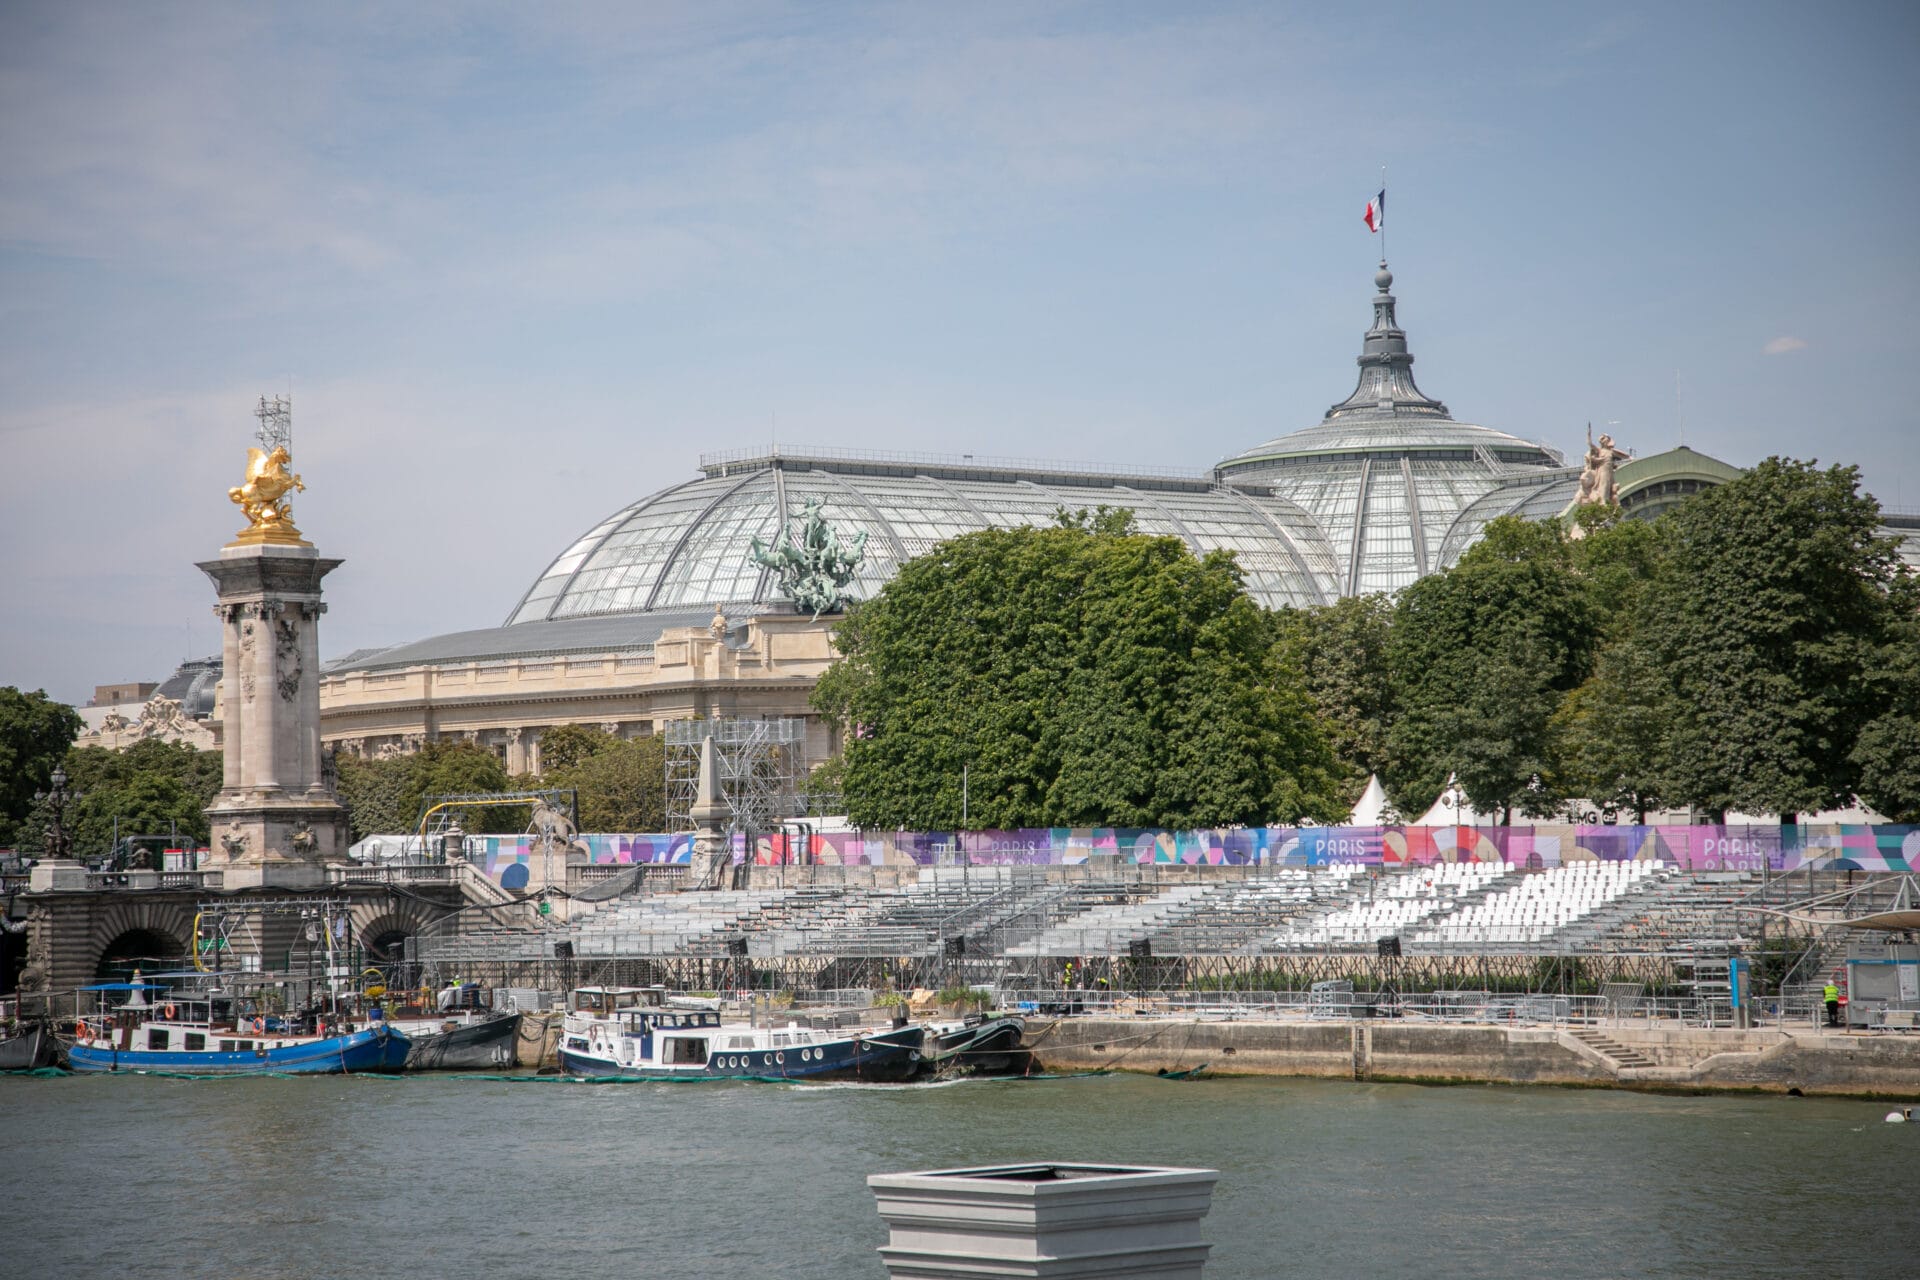 Bleachers were installed on the quay of the Seine river near Grand Palais area in Paris, France on July 18, 2024. A protected area has been created for the opening ceremony of the Paris 2024 Olympic Games. (Photo by Victoria Valdivia / Hans Lucas / Hans Lucas via AFP)